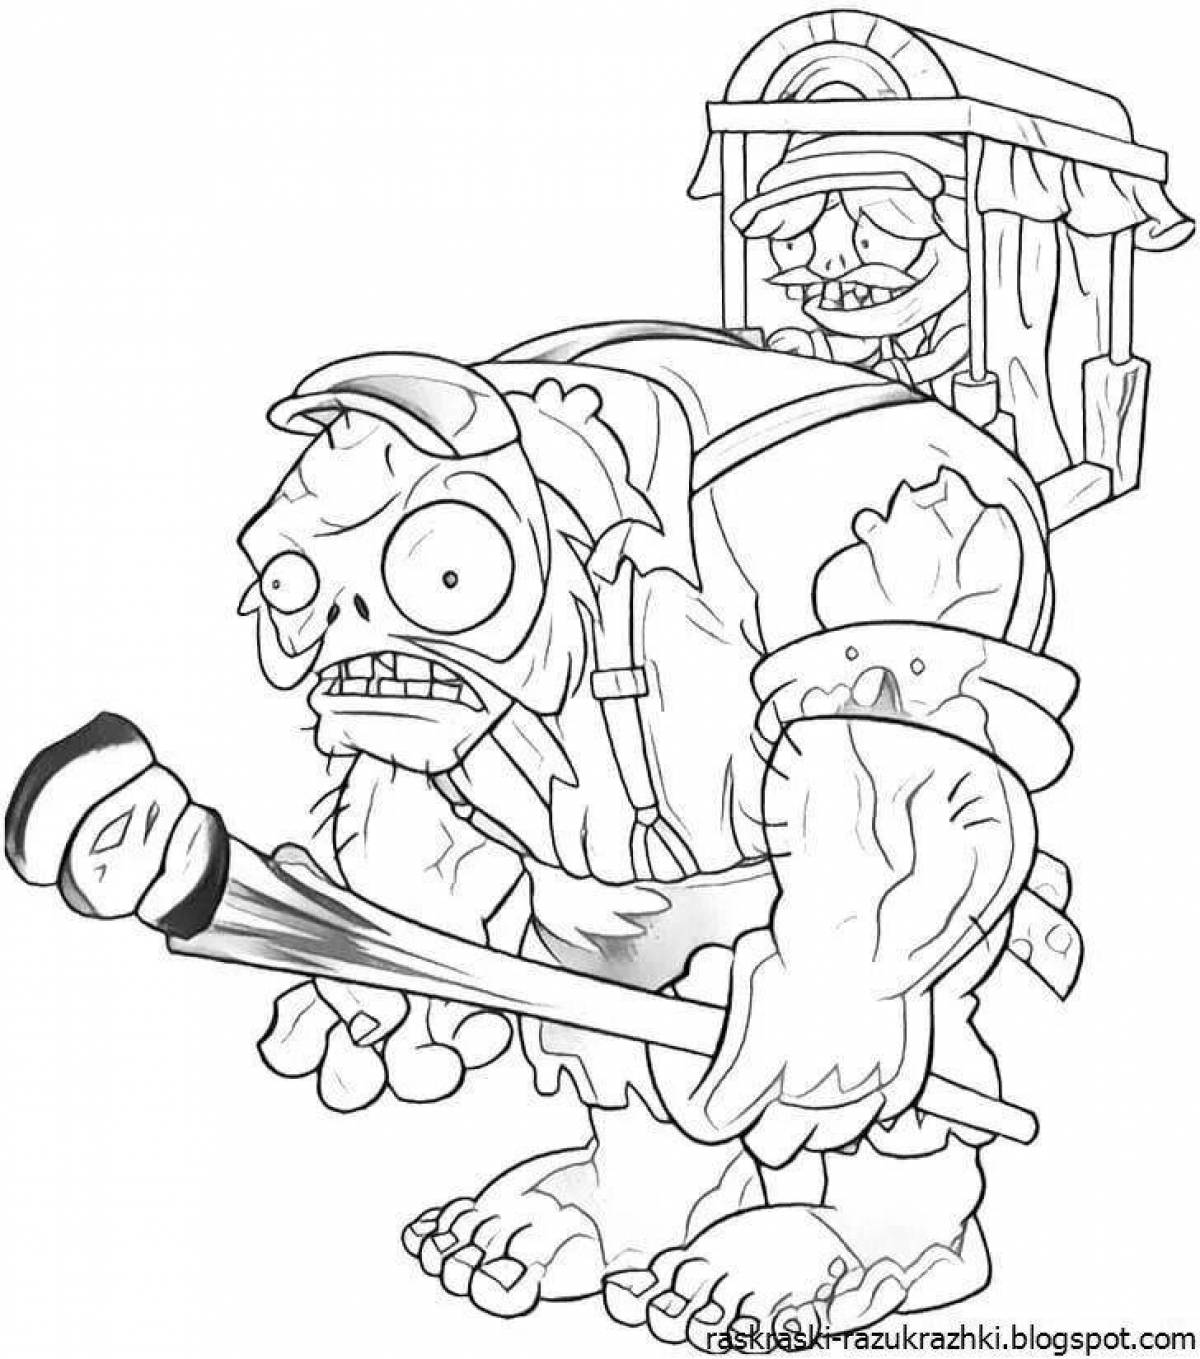 Plants vs zombies 2 zombie coloring page